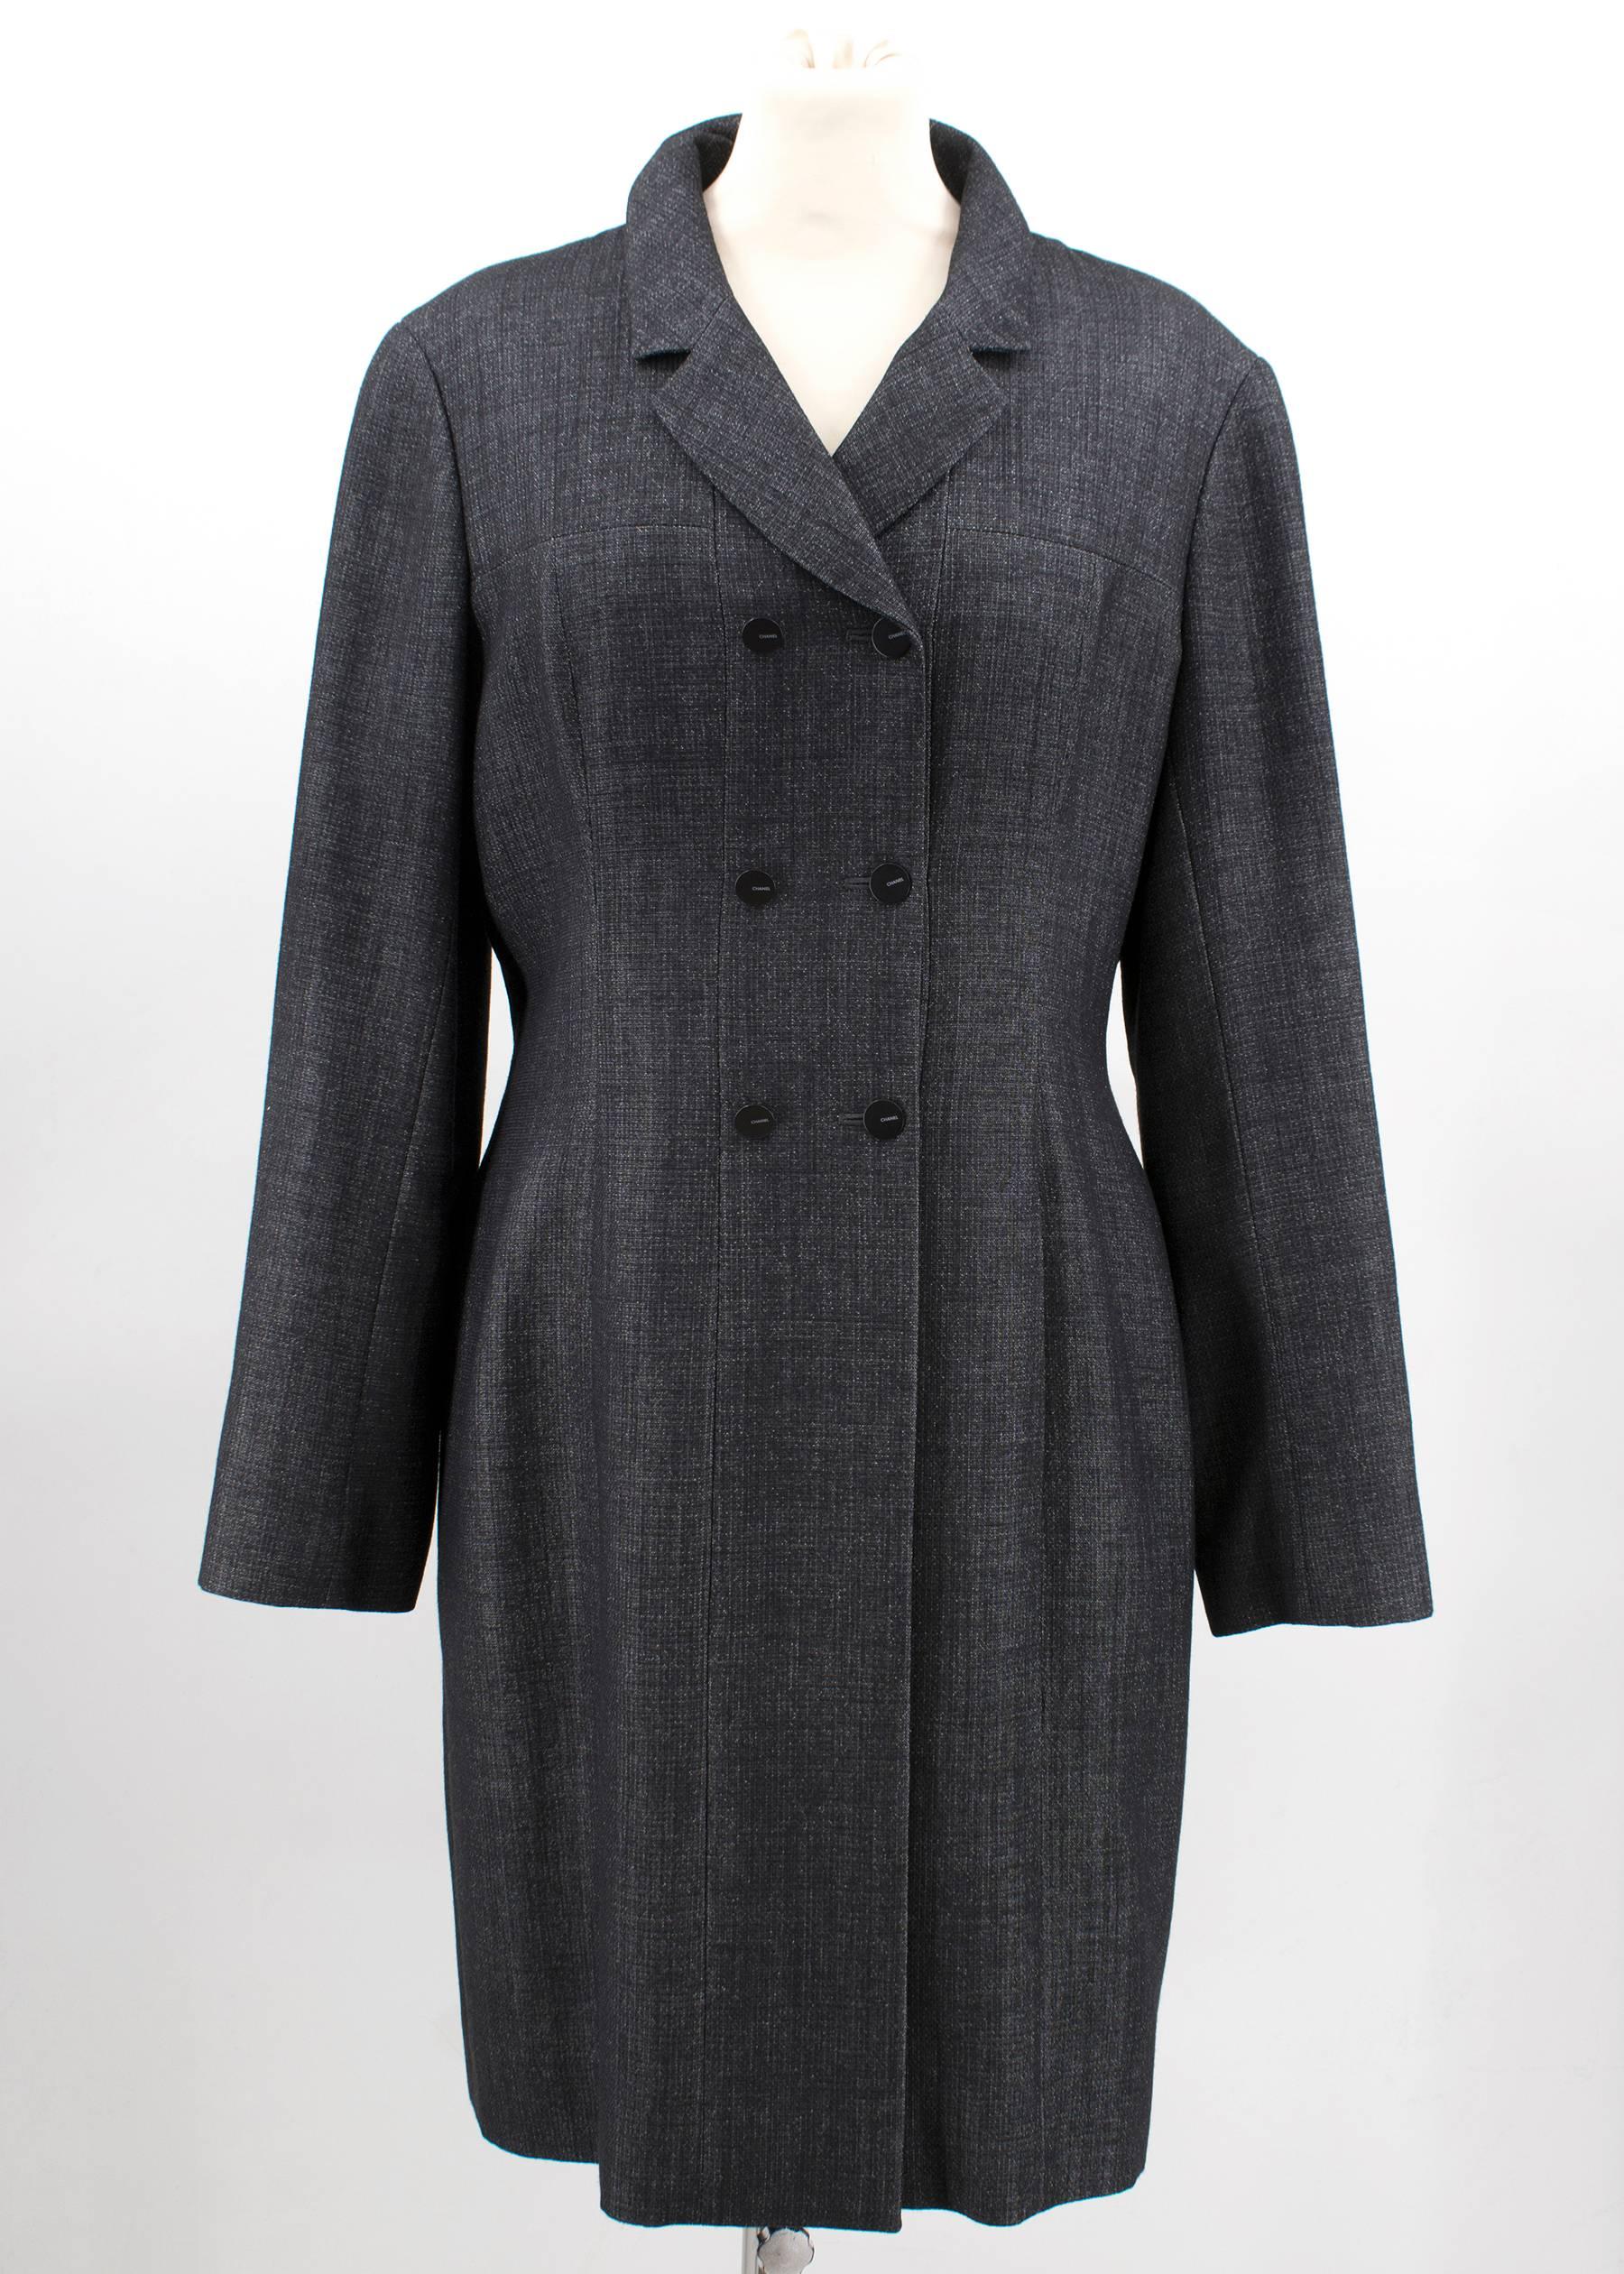 Chanel Wool Blend grey coat. It is a 3/4 oversized coat featuring 2 side pocket slits, black Chanel buttons 

Fabric: 65% wool, 19% polyester, 10% polyamide, 6% cotton; lining 100% silk
Condition: 9.5 out of 10

Measurements: Oversized Fit.